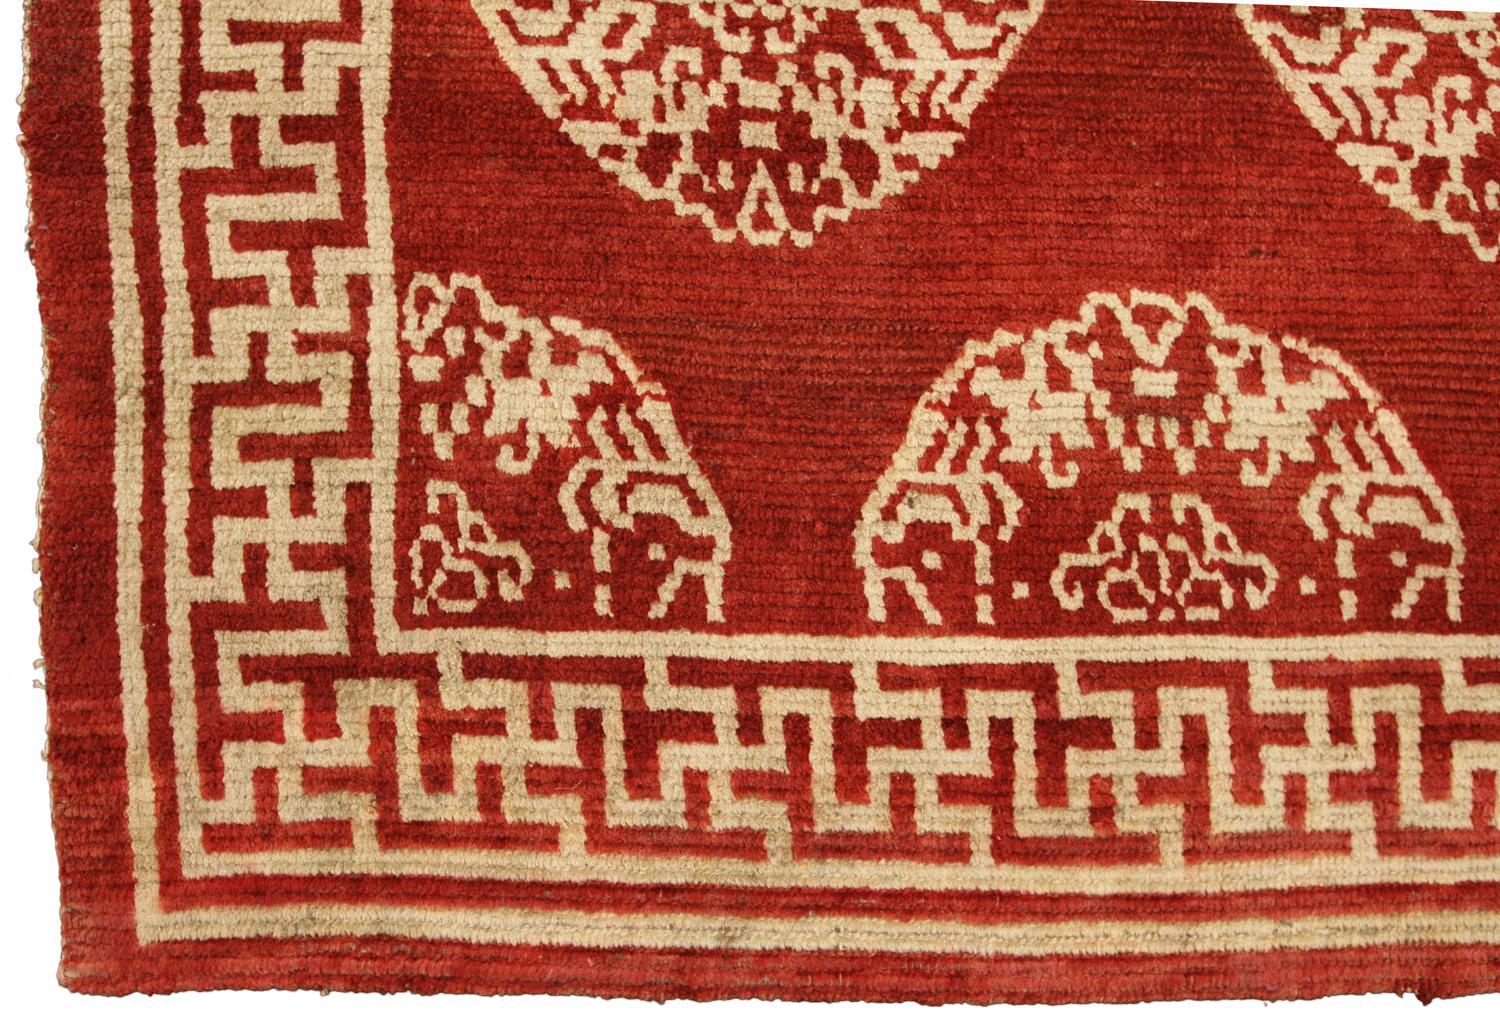 This is an antique Tibetan rug woven during the beginning of the 20th century circa 1900 and measures 156 x 80CM in size. Its field depicts five rows of highly geometric beige-colored medallions which are indicative of Tibetan and Chinese culture